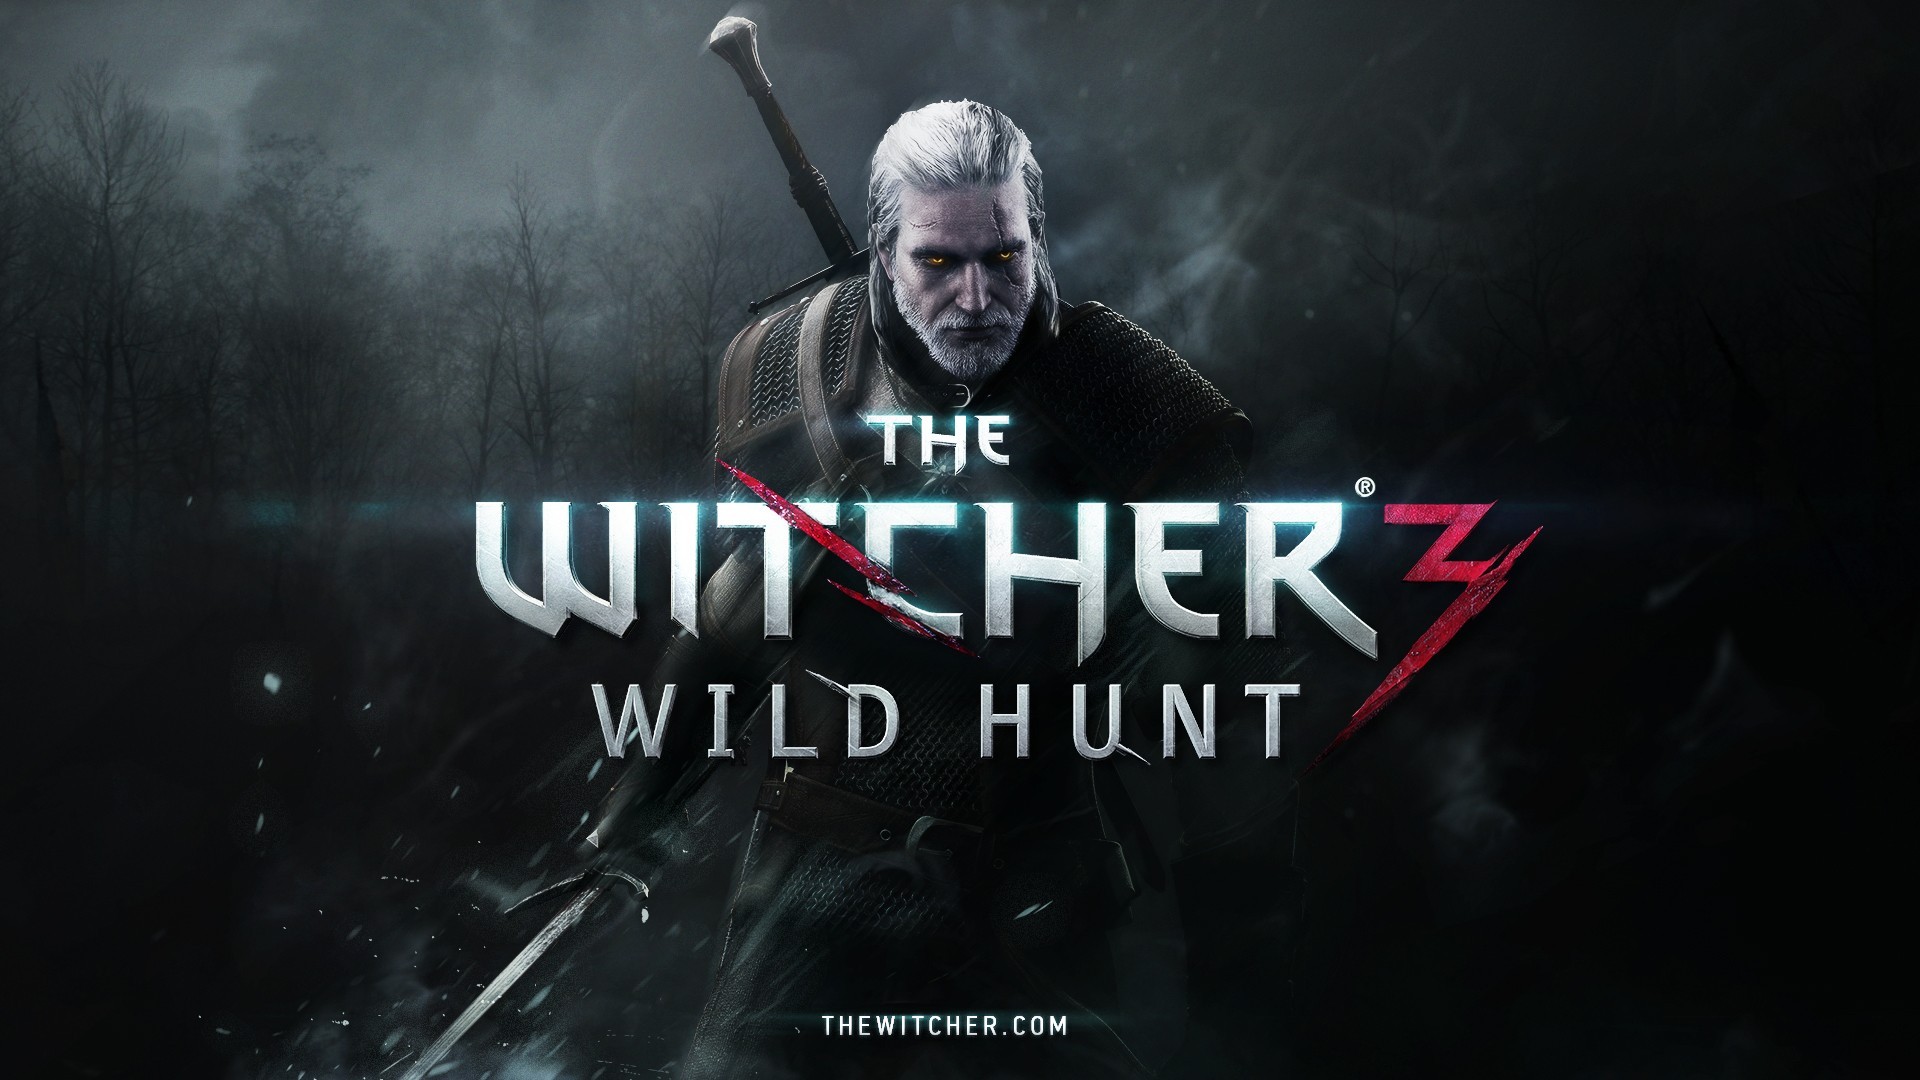 General 1920x1080 The Witcher 3: Wild Hunt video games The Witcher Geralt of Rivia RPG PC gaming fantasy men video game men